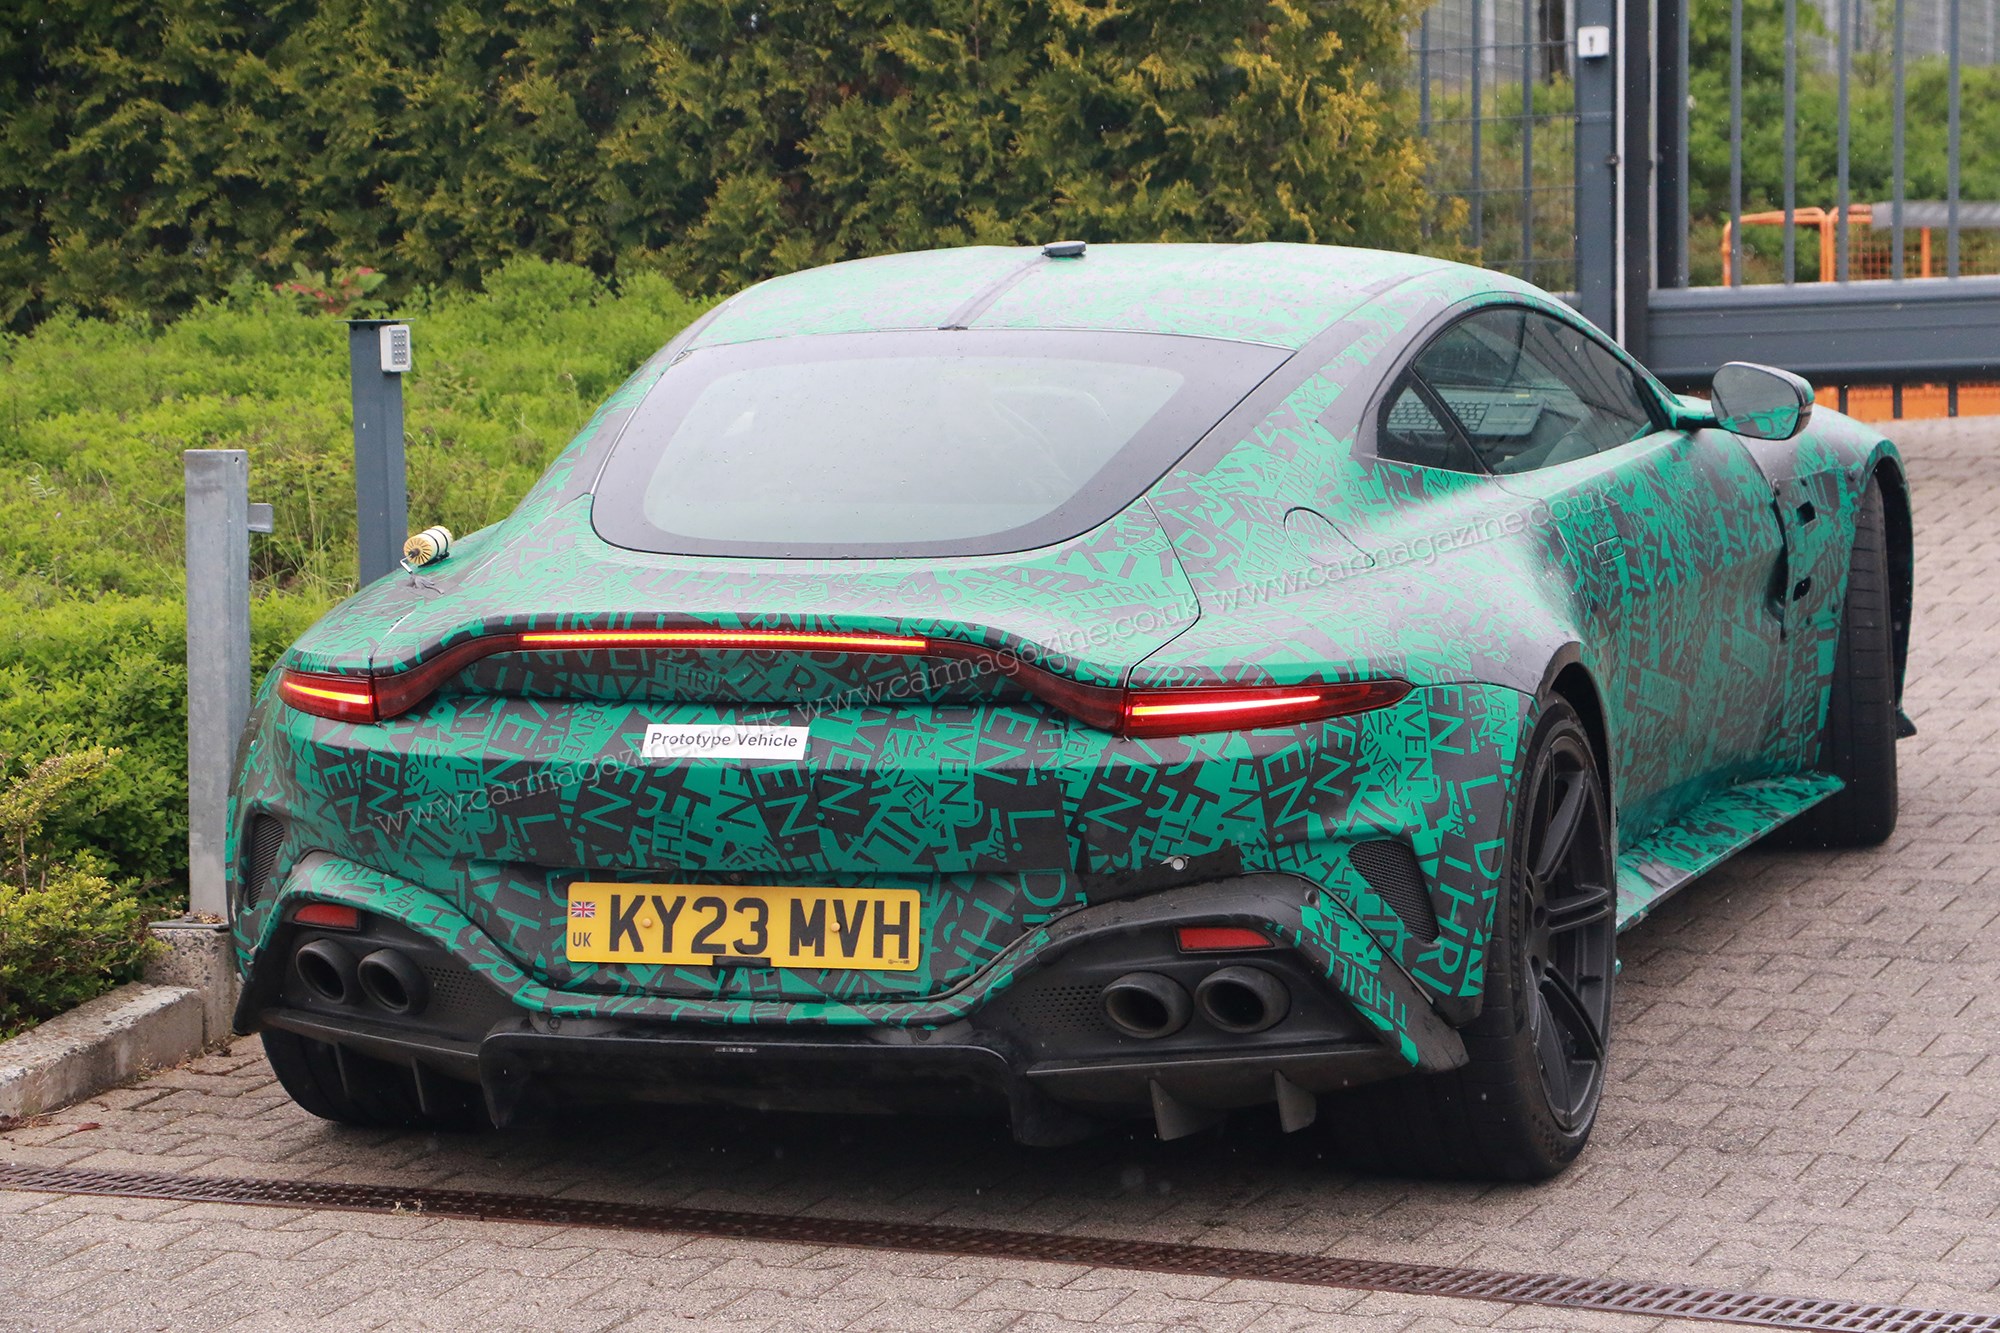 2024 Vantage GT3 race car breaks cover here's what's next for Aston